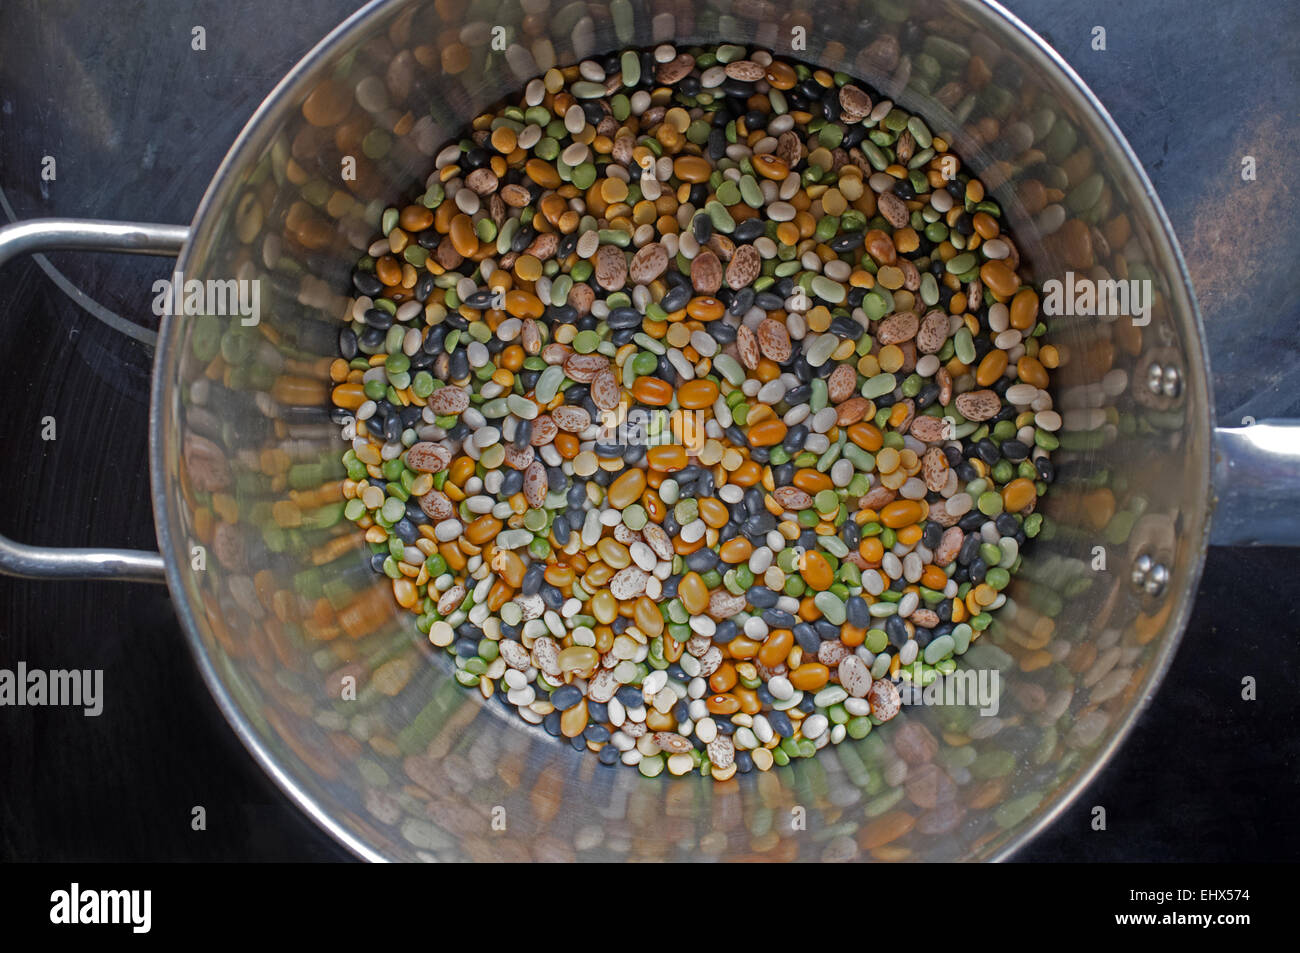 Dried mixed beans in a saucepan prior to soaking Stock Photo